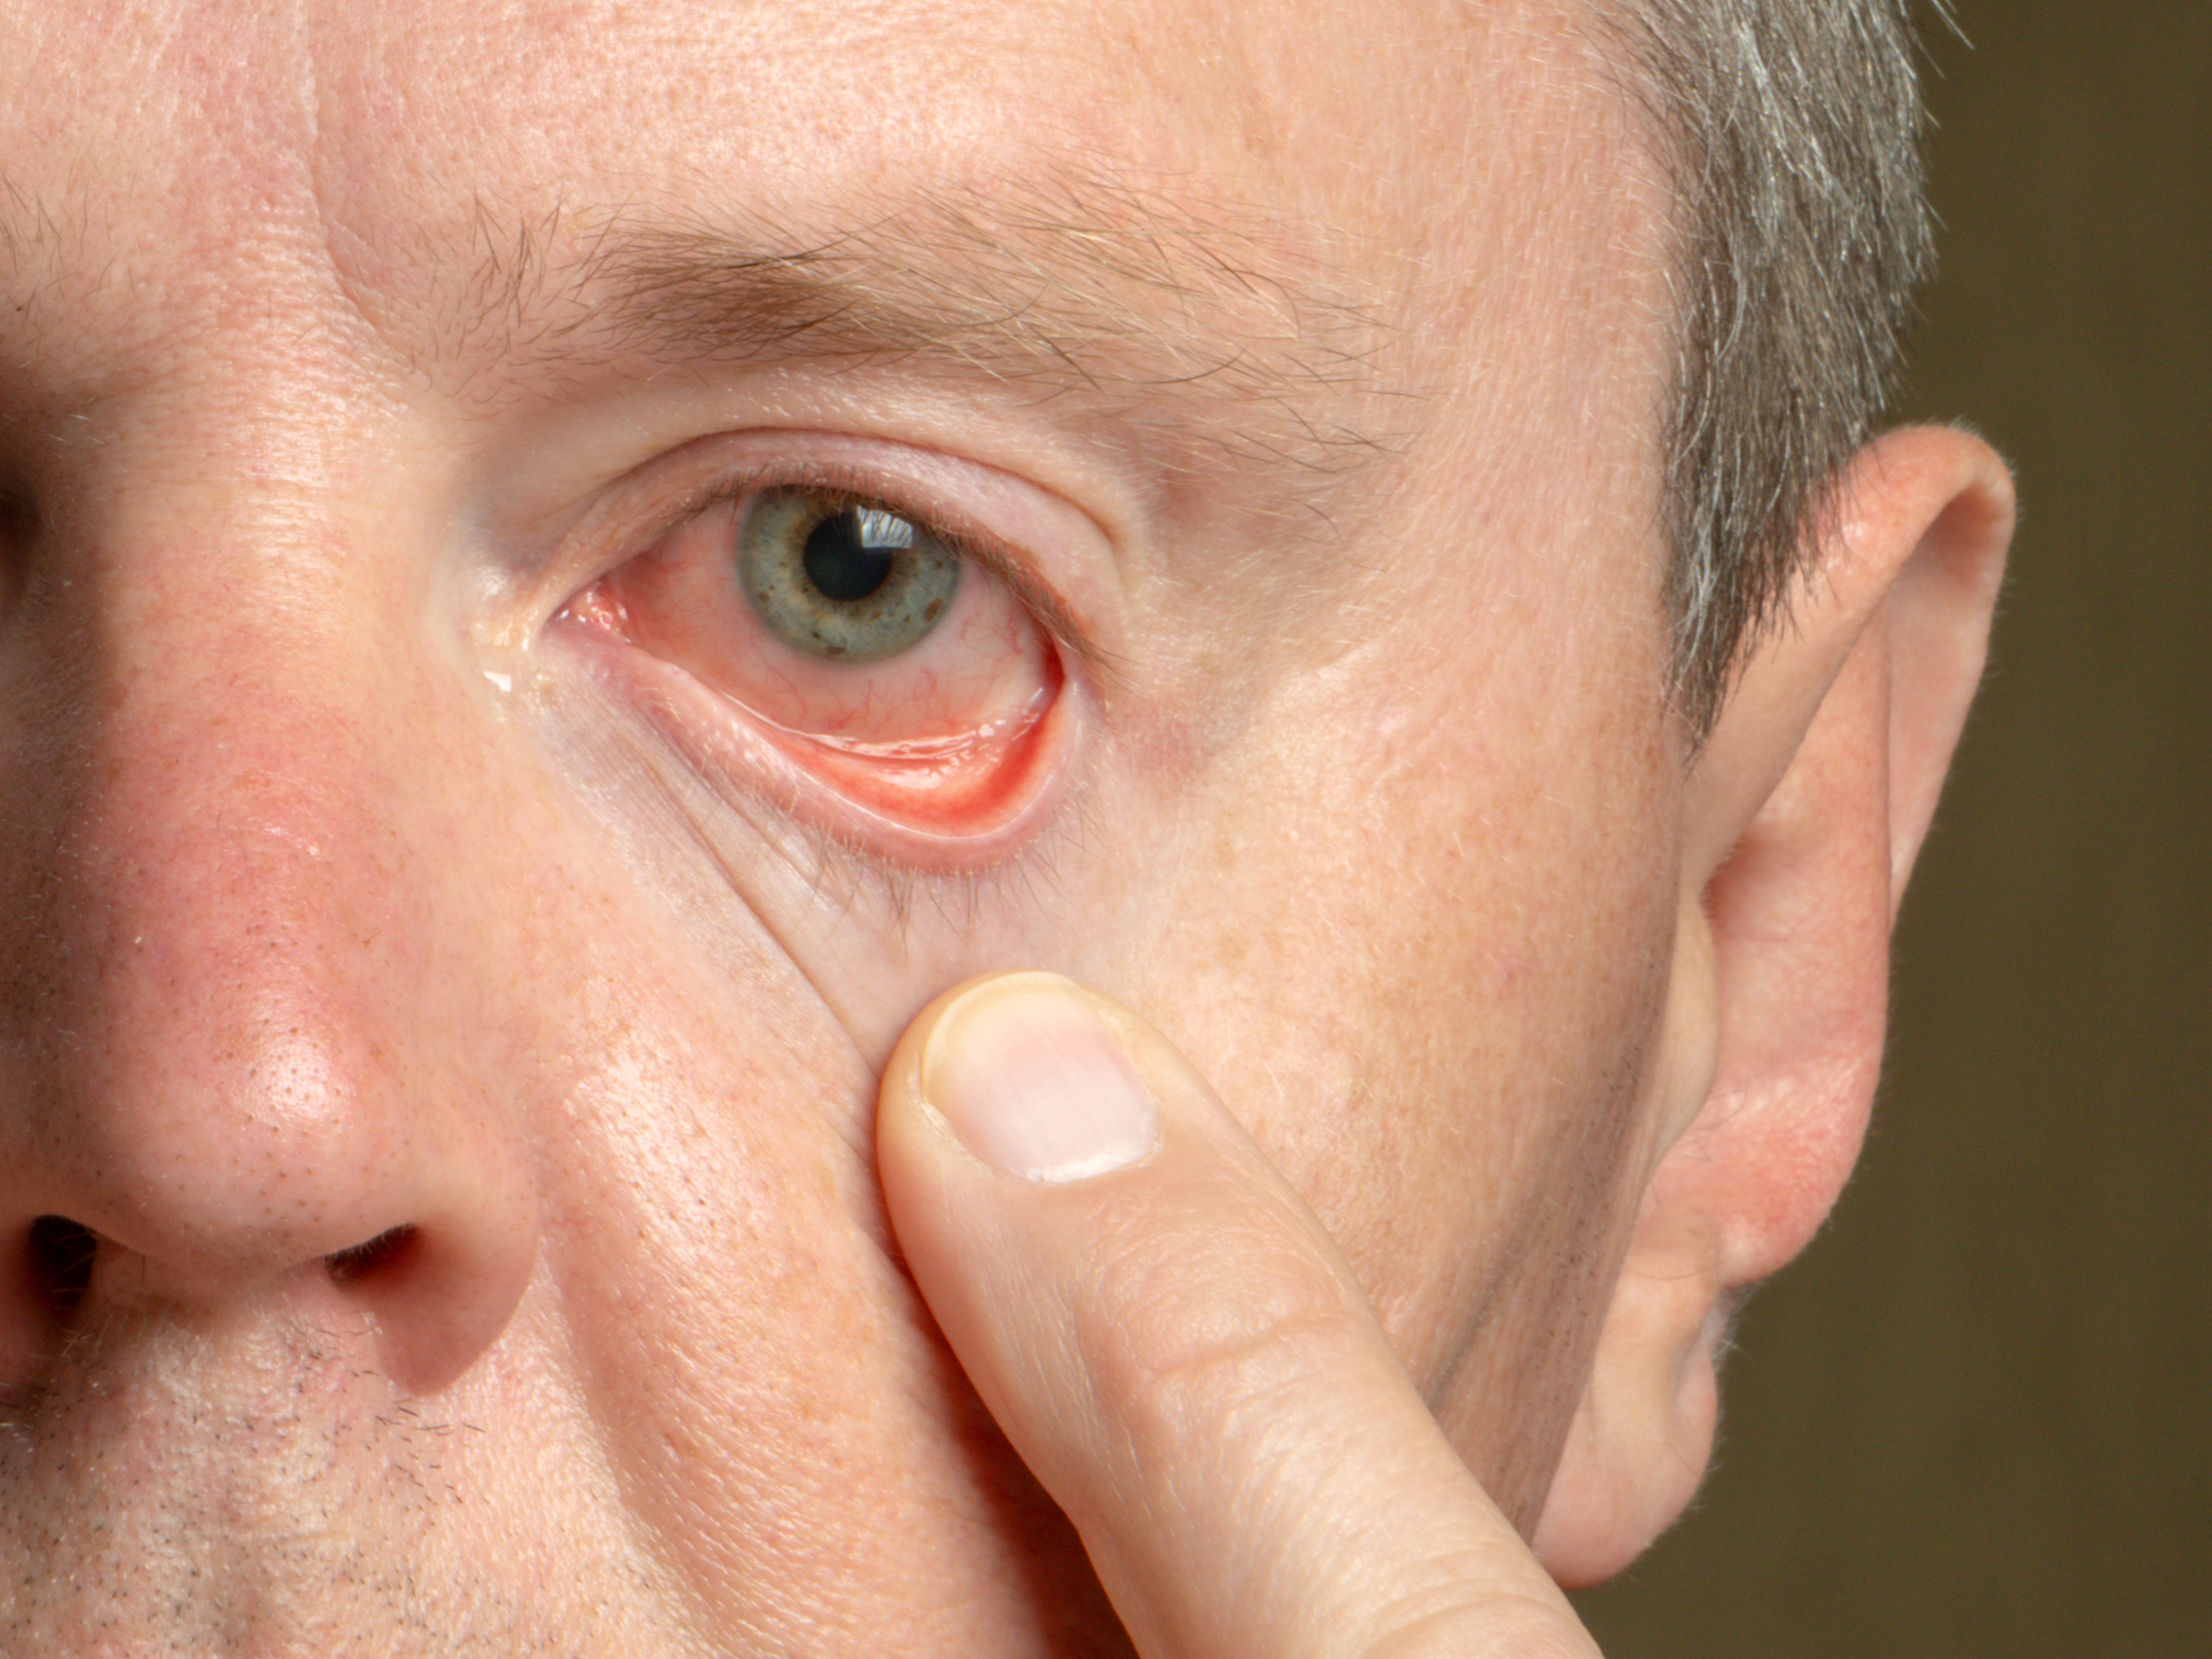 The eye symptom that signals a serious case of COVID-19